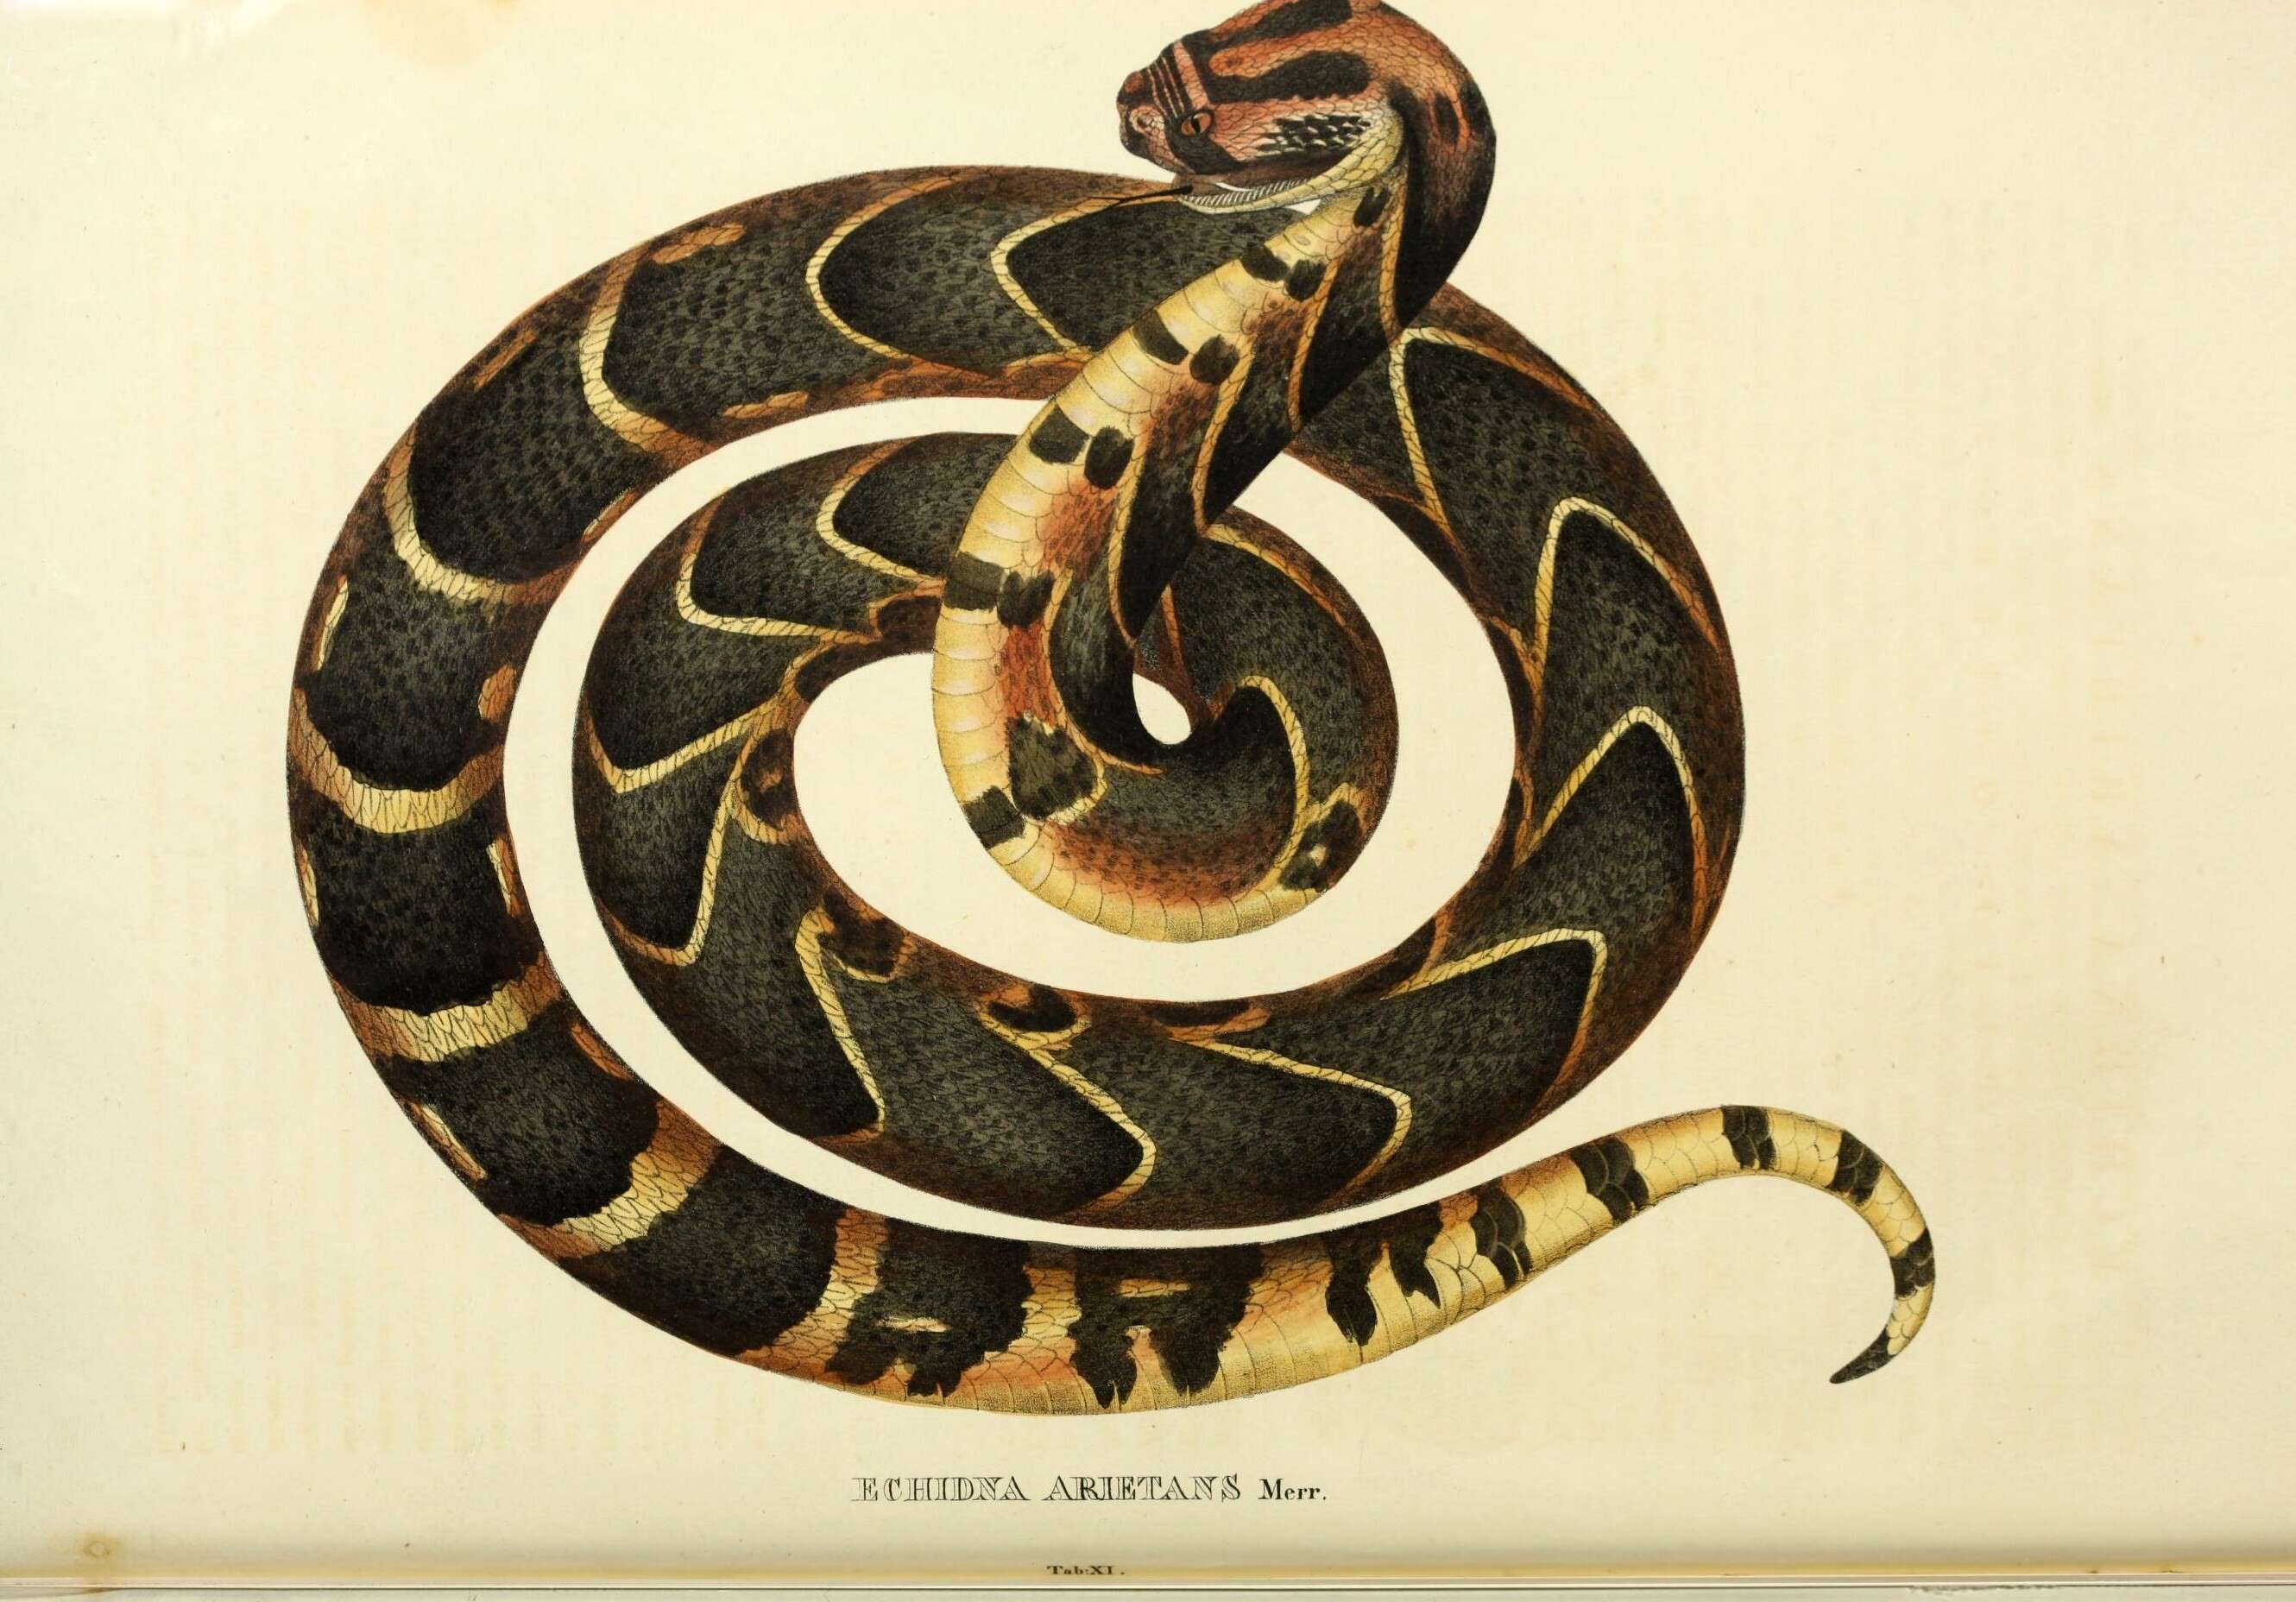 Image of vipers